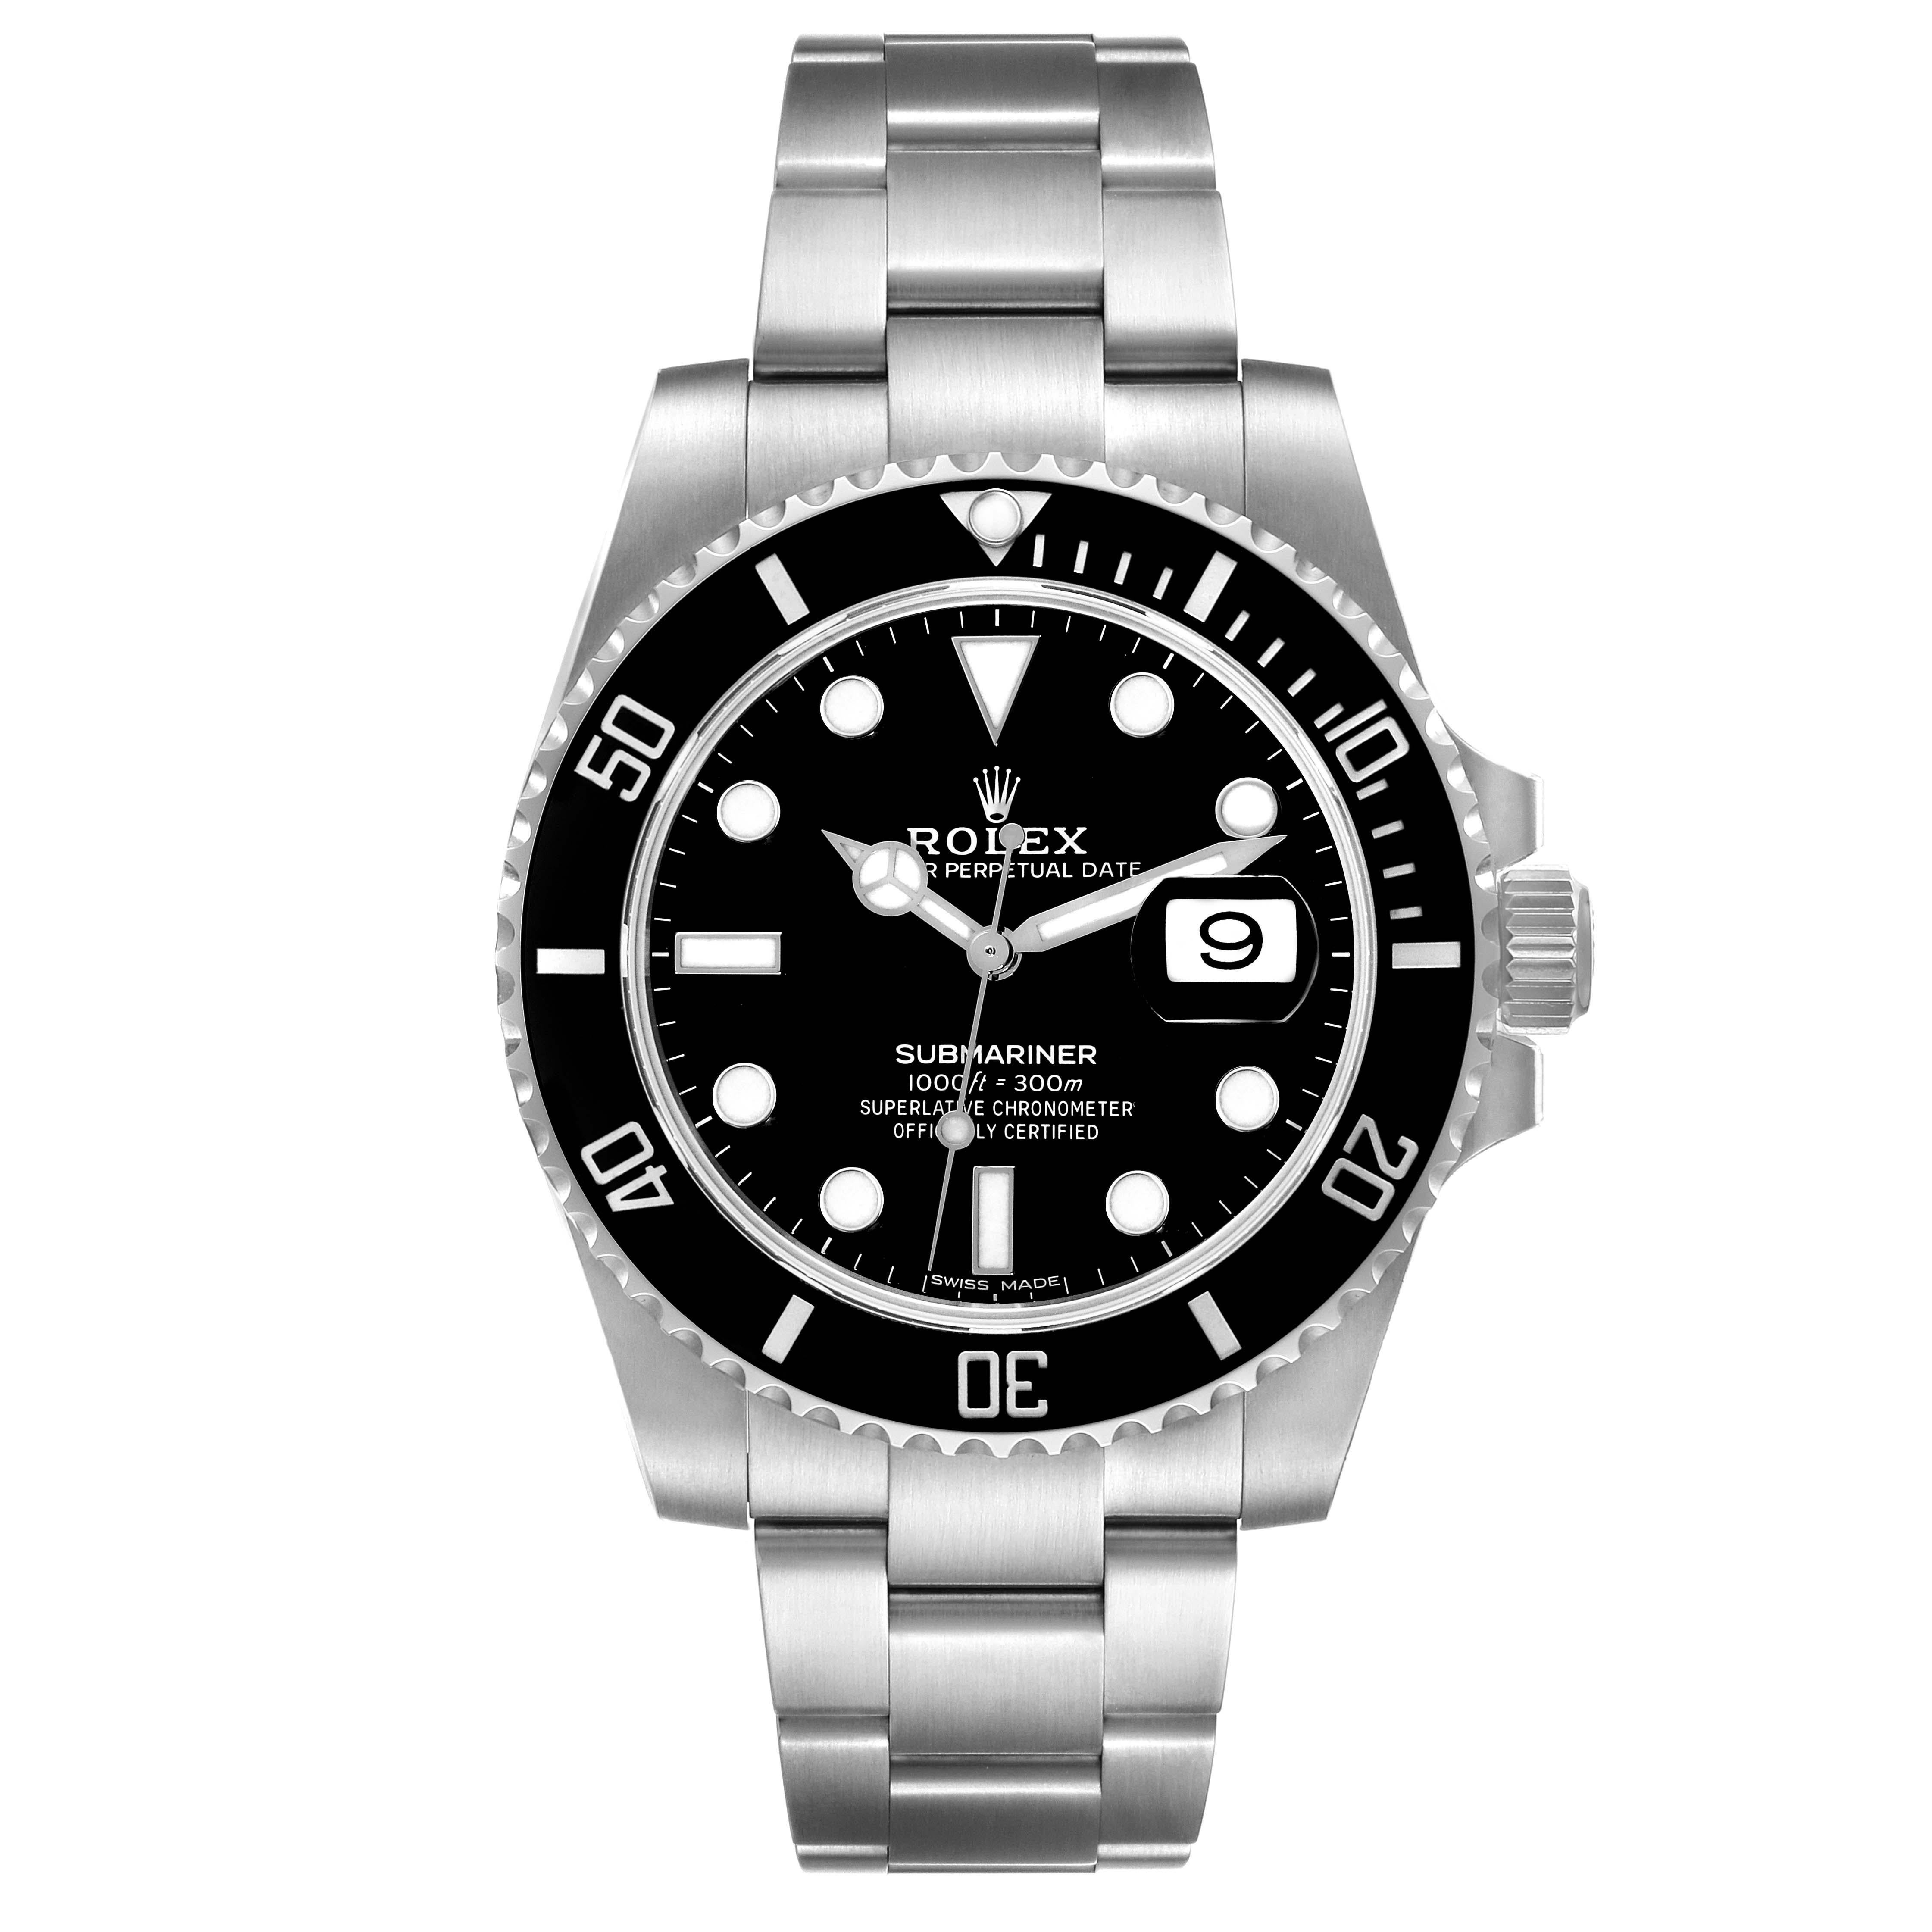 Rolex Submariner Date Black Dial Steel Mens Watch 116610. Officially certified chronometer automatic self-winding movement. Stainless steel case 40 mm in diameter. Rolex logo on the crown. Unidirectional rotating black ceramic bezel with 60 minutes